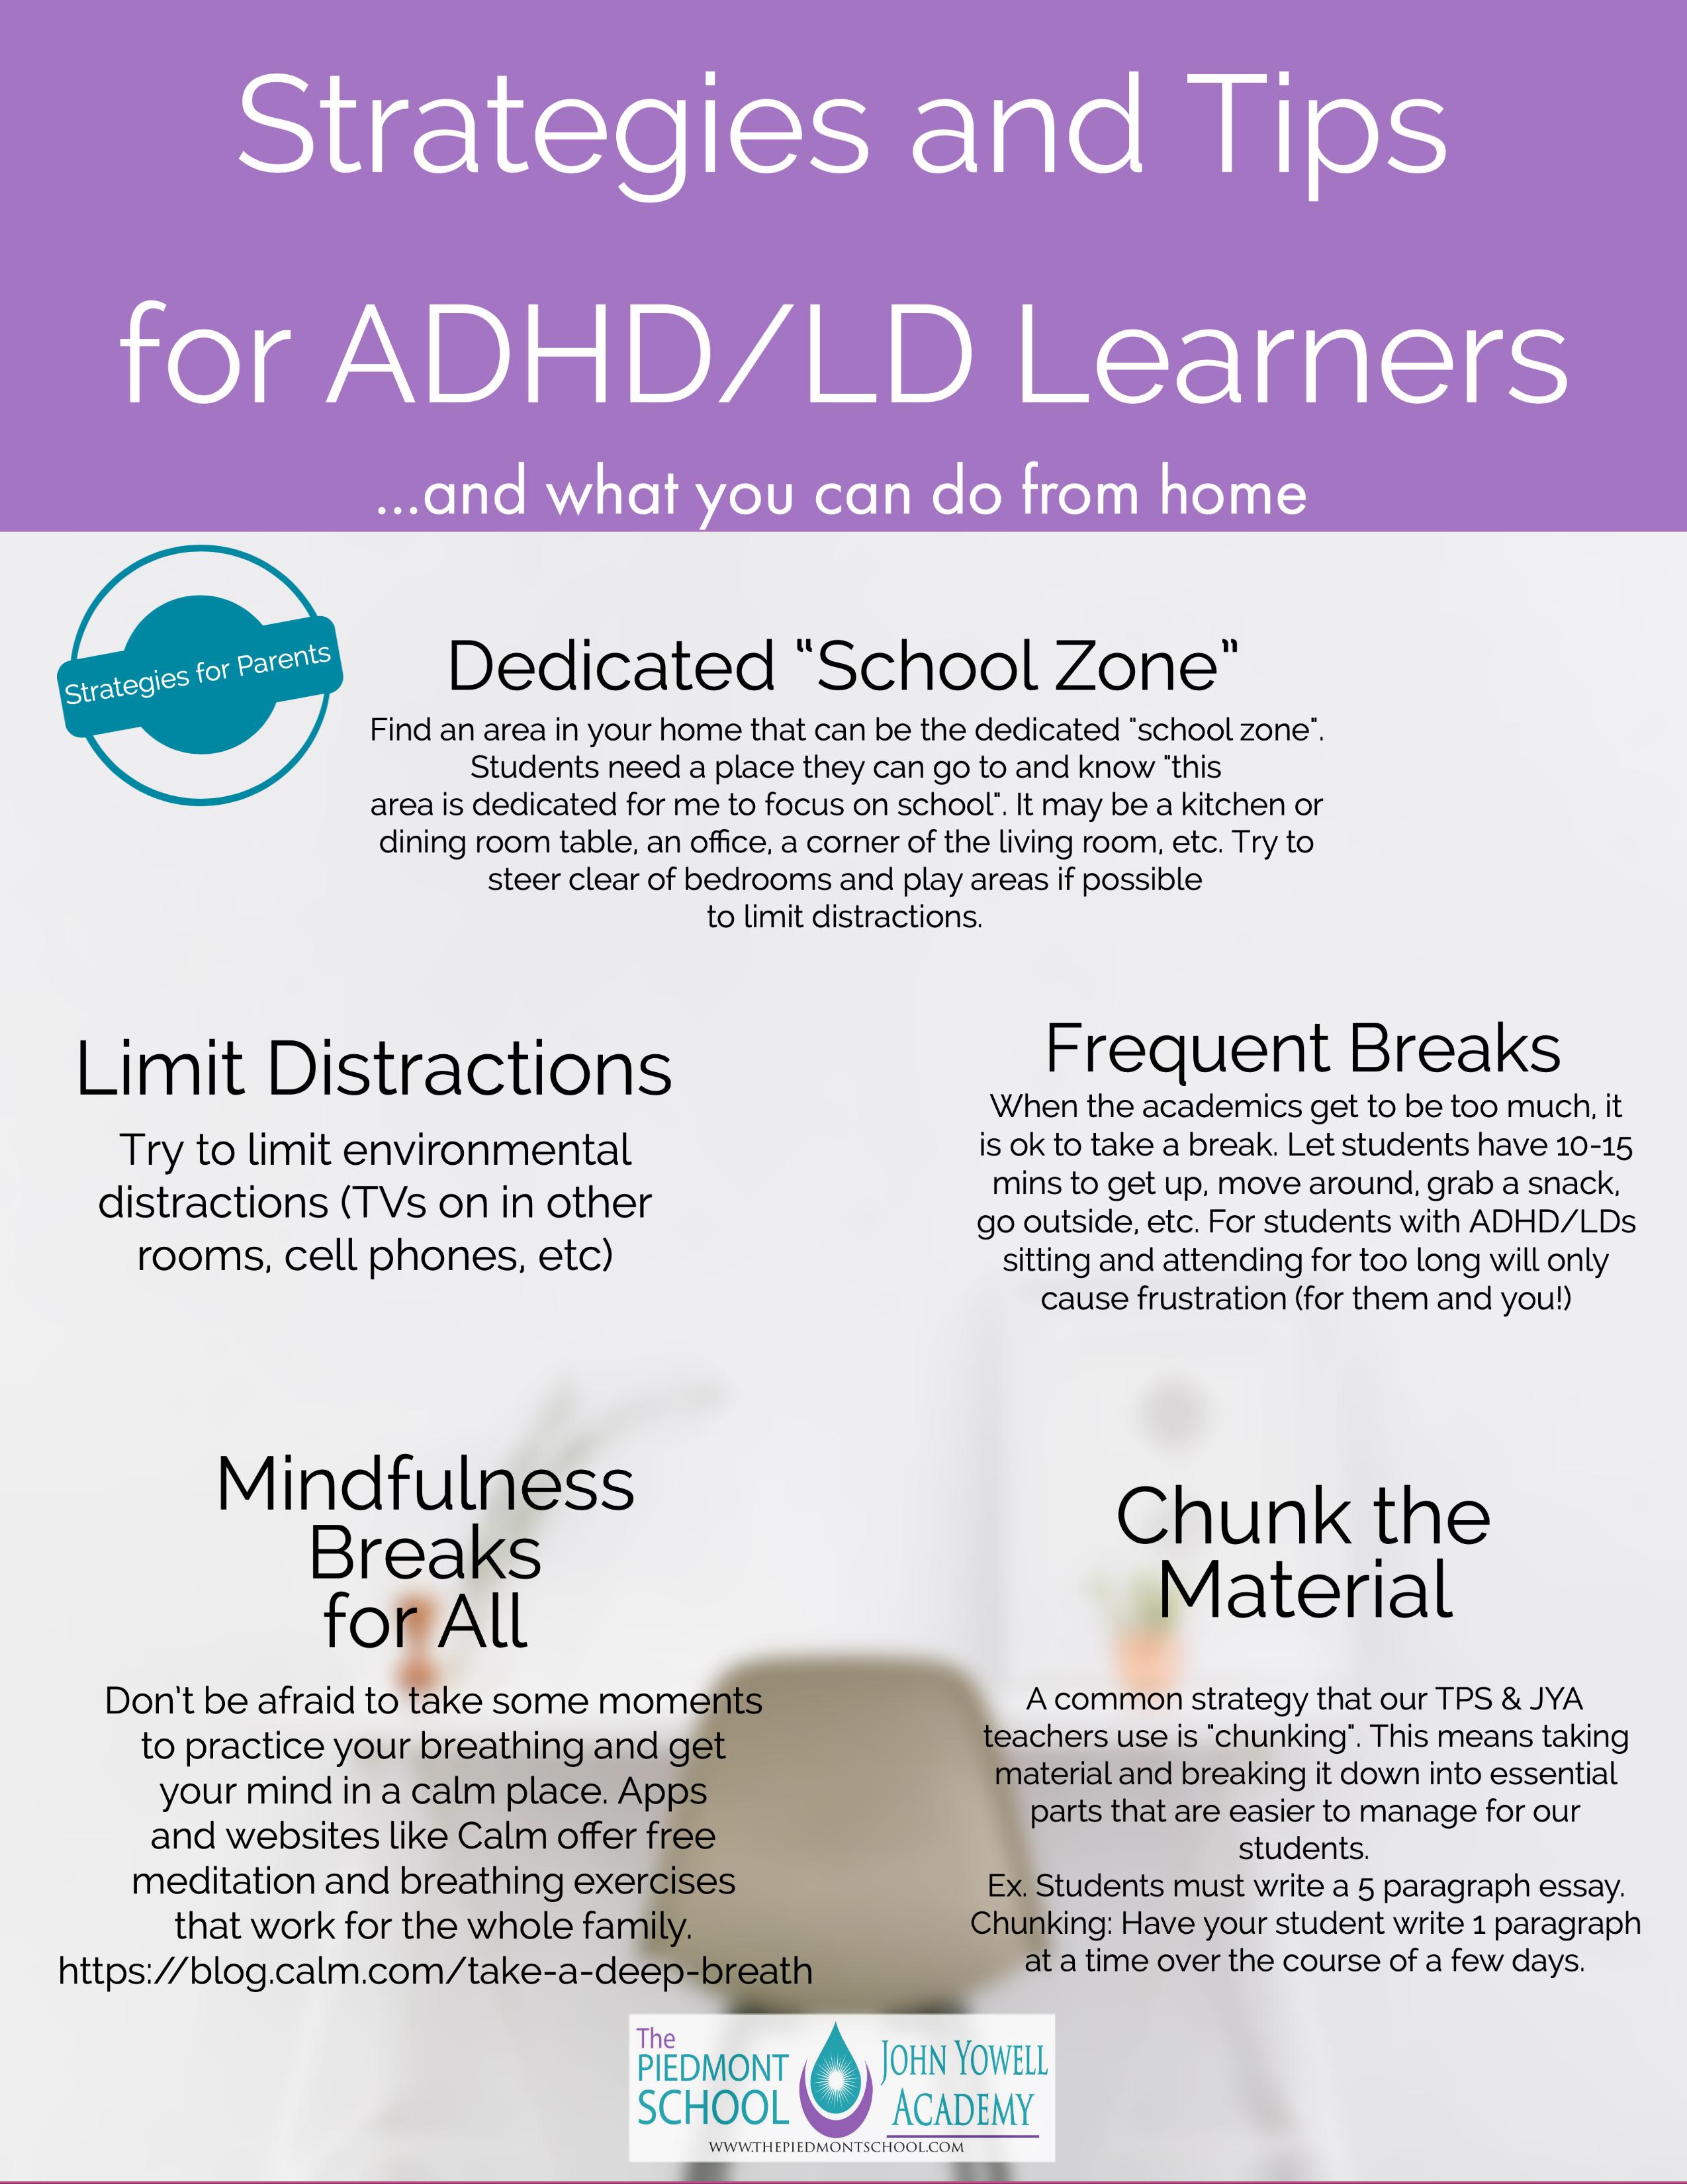 Strategies-and-Tips-for-ADHD_LD-Learners.jpg